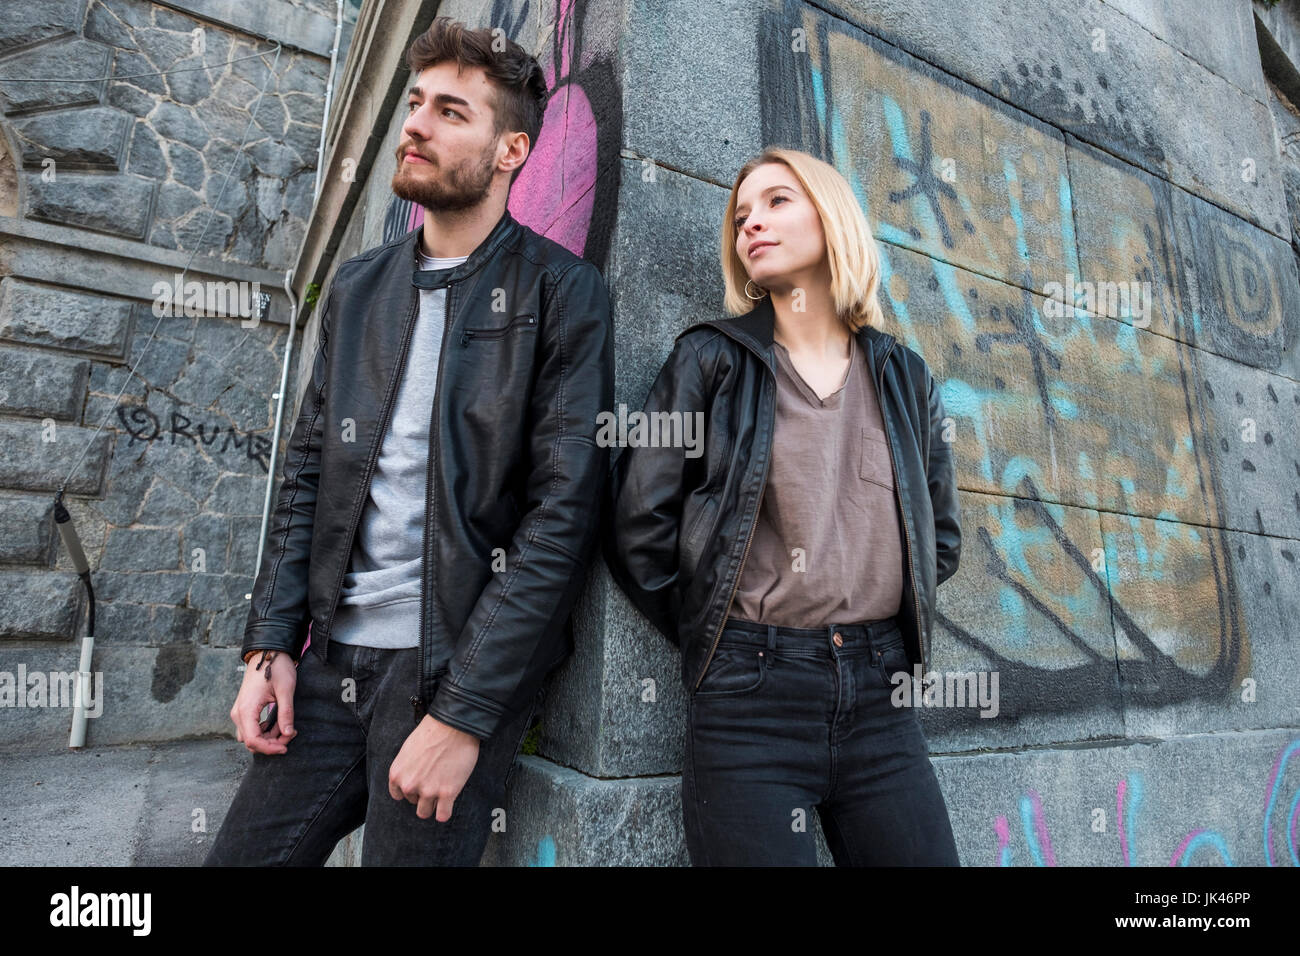 Caucasian couple leaning on wall with graffiti Stock Photo